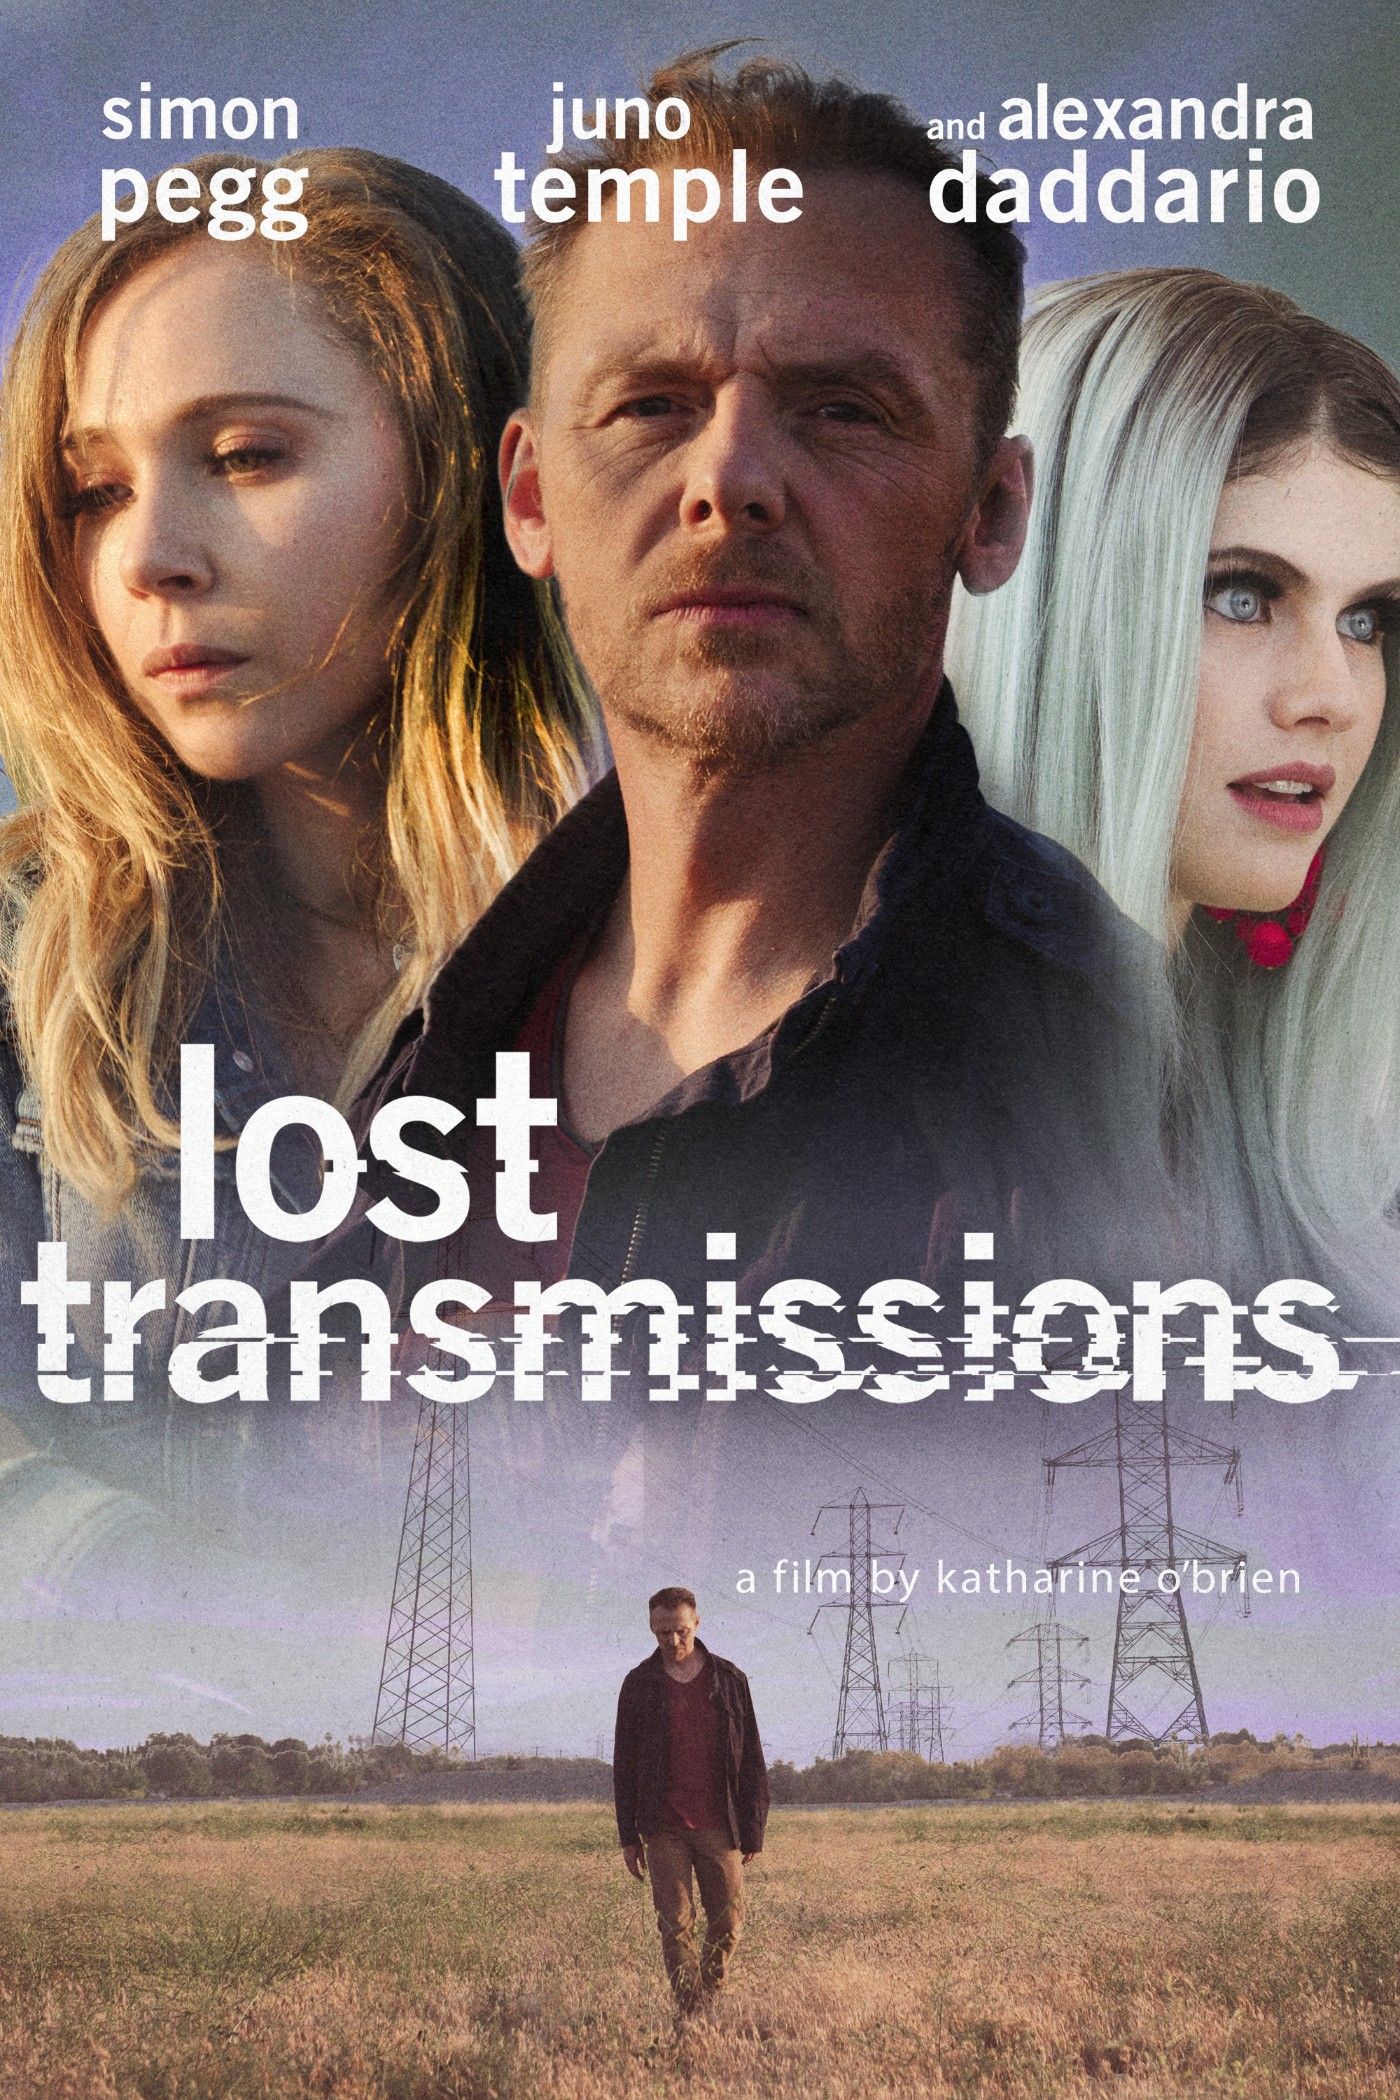 Lost Transmissions Movie Poster (Simon Pegg)